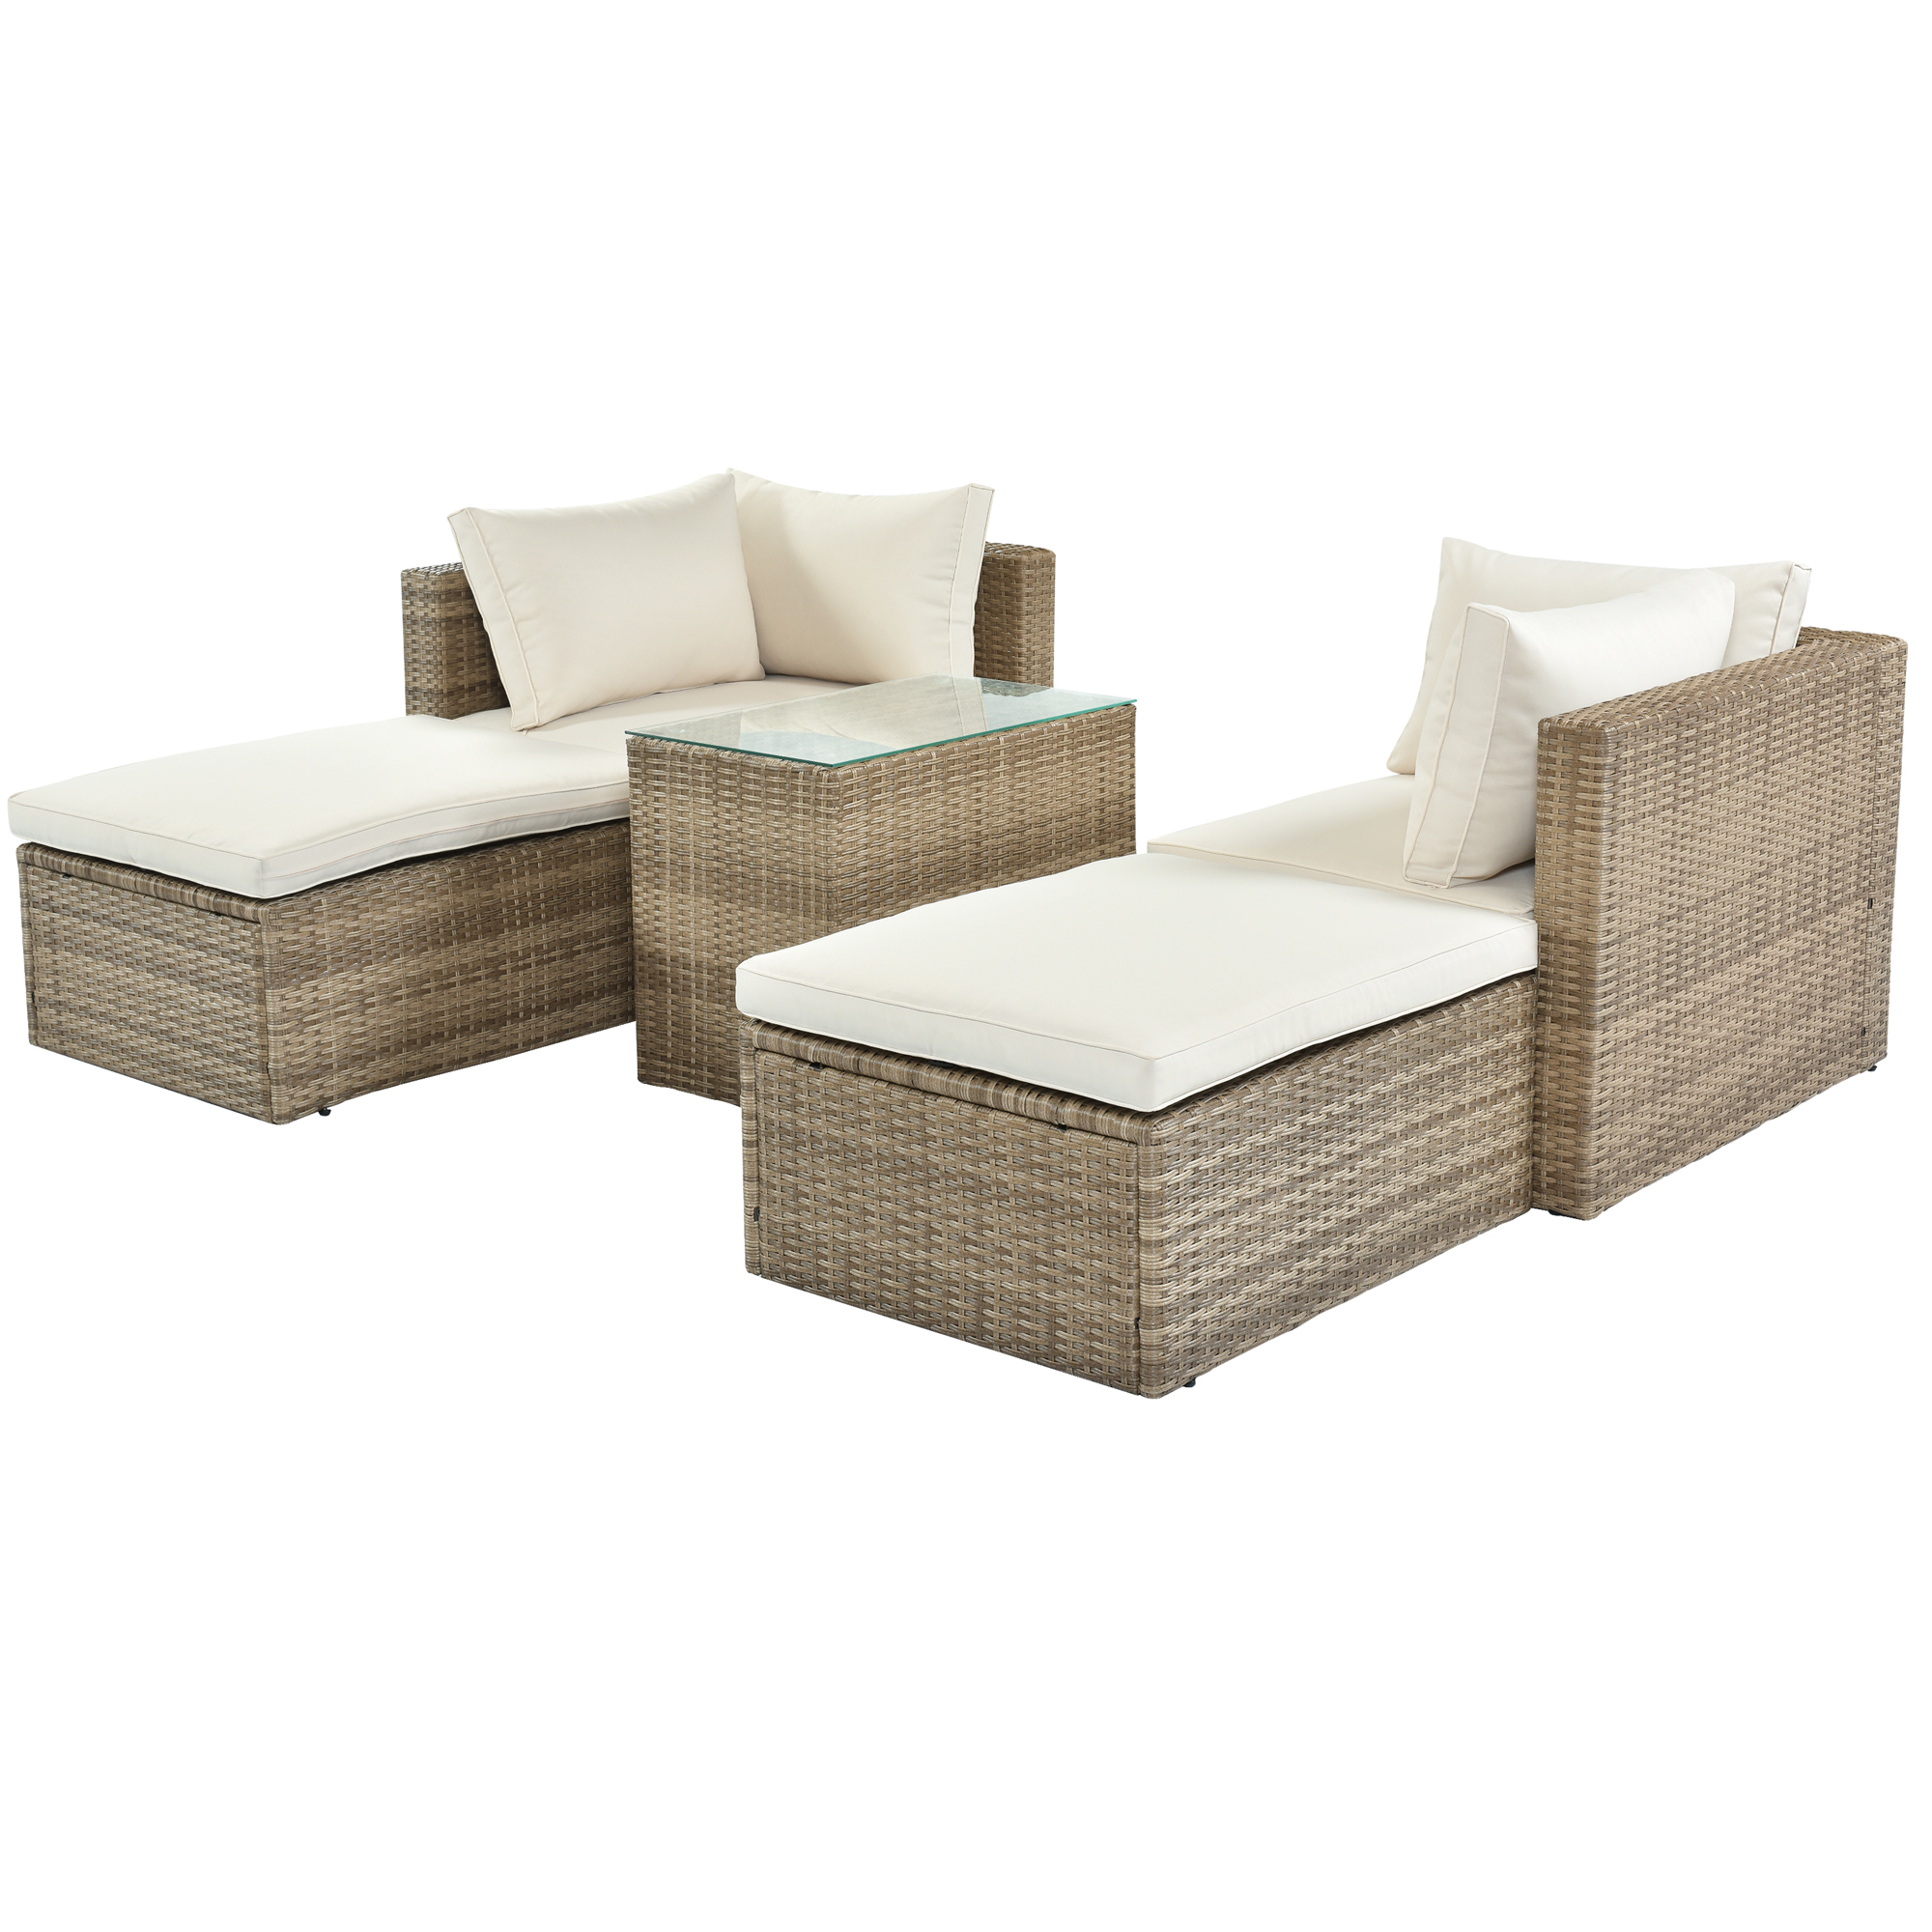 Cfowner 5 Piece Wicker Patio Furniture Set, PE Wicker Rattan Small Patio Set Porch Furniture, Cushioned Patio Chairs Set w/Ottoman &Table, Outdoor Lounge Chair Chat Conversation Set - image 3 of 6